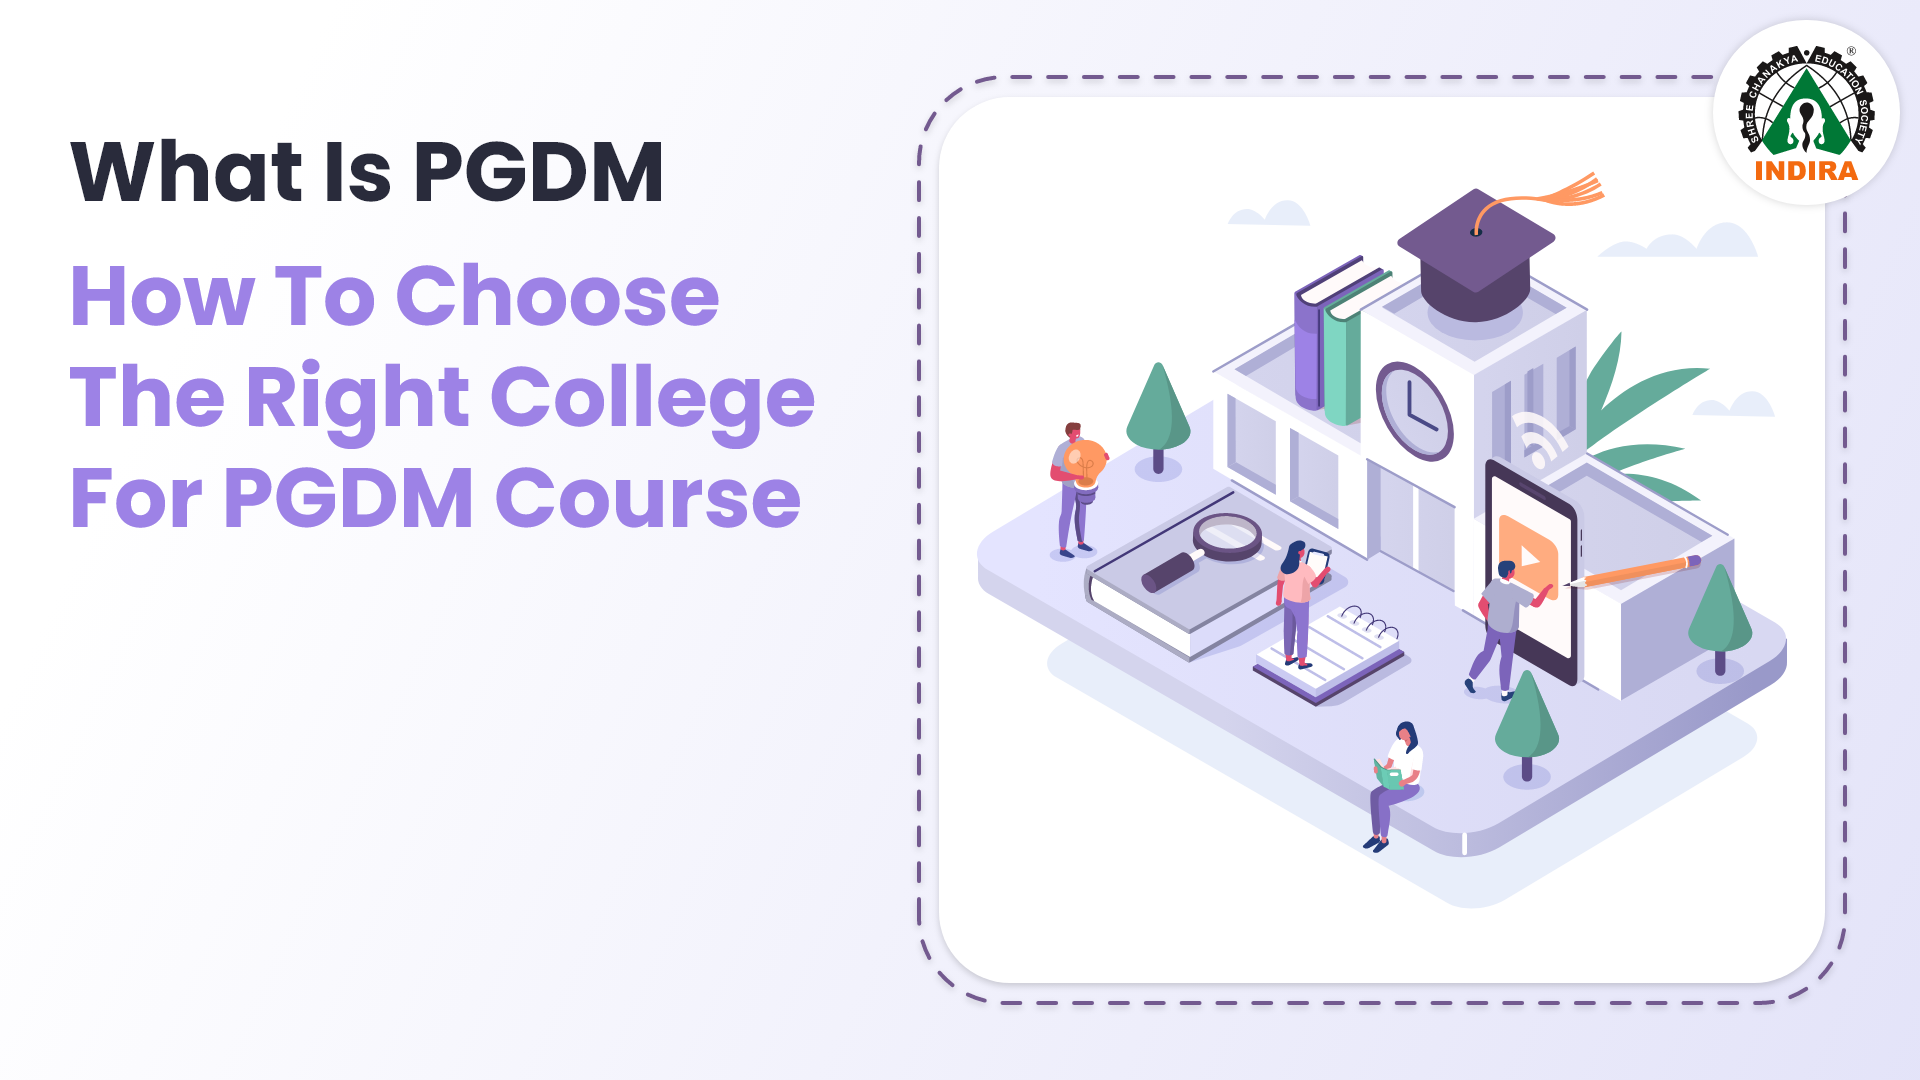 What is PGDM? How to choose the right college for PGDM course